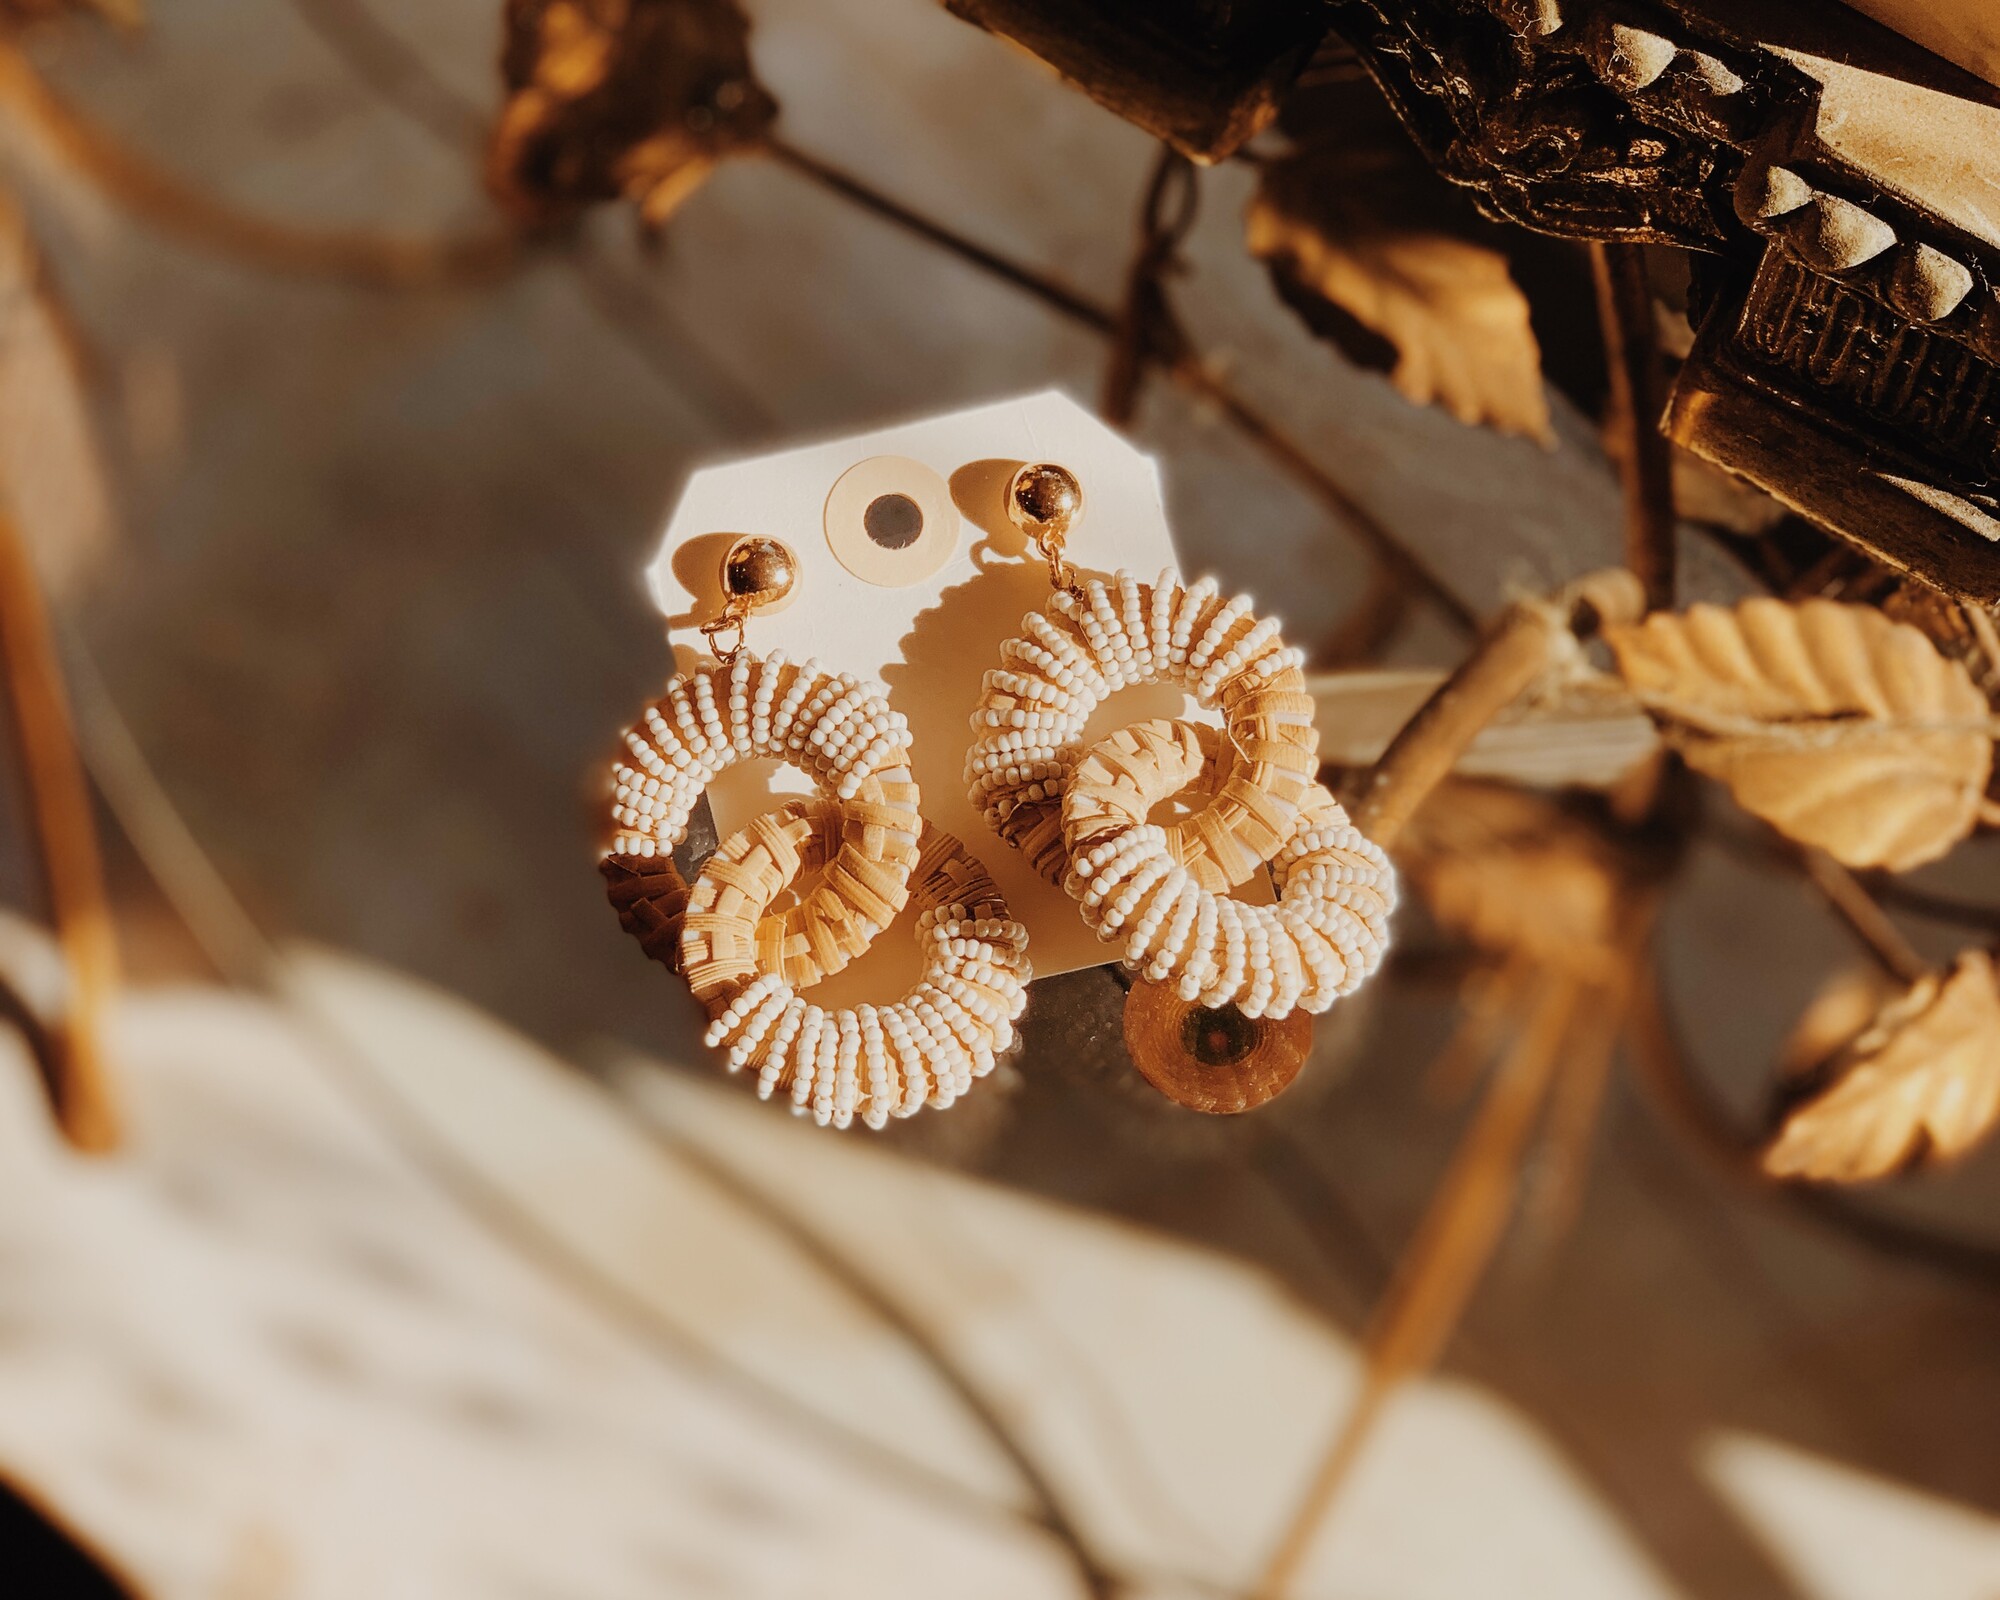 These adorable earrings are made from wicker and have white beads adorning them! They measure 3 inches long.